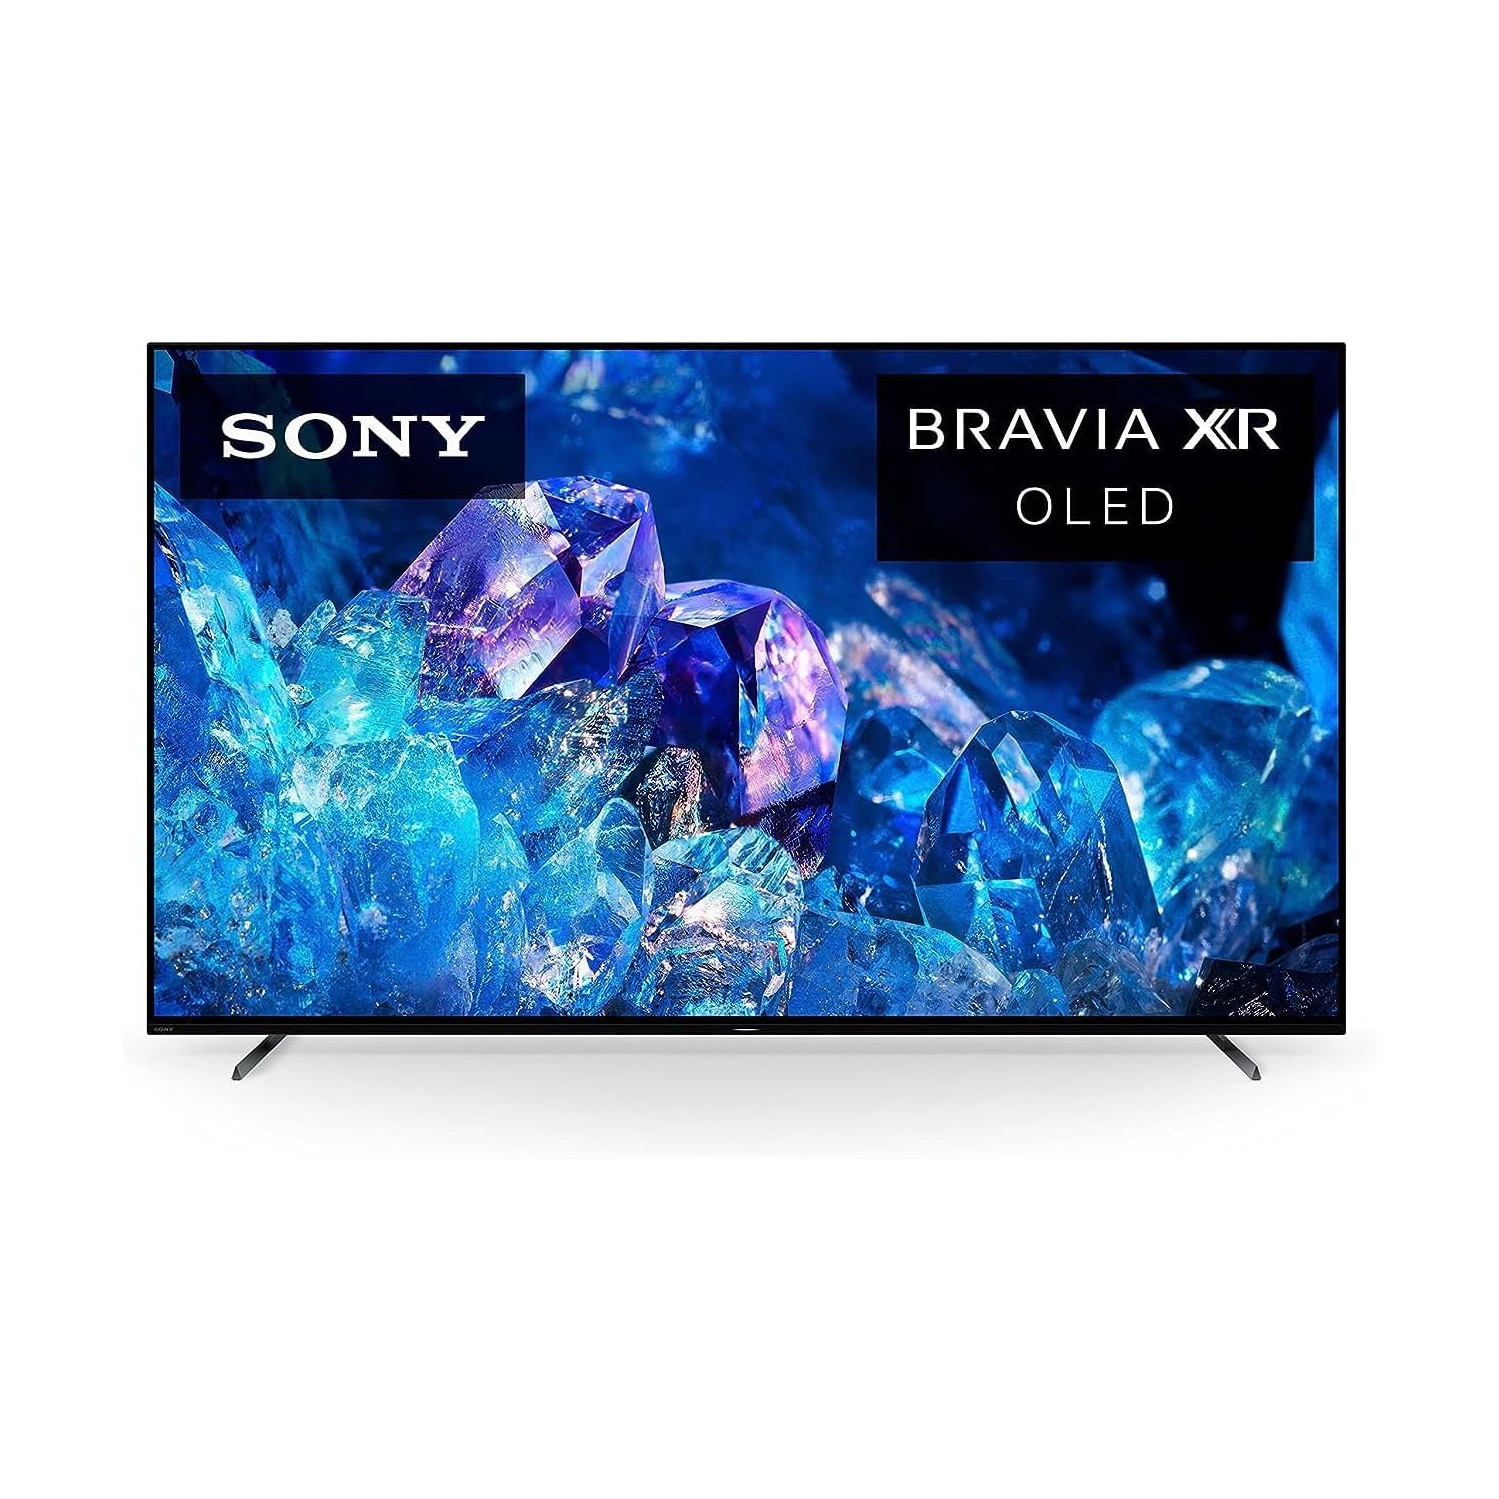 Sony BRAVIA XR 65" 4K UHD HDR OLED Google TV Smart TV (XR65A80K) - 2022 - Titanium Black Open Box 10/10 Condition with One Year Warranty